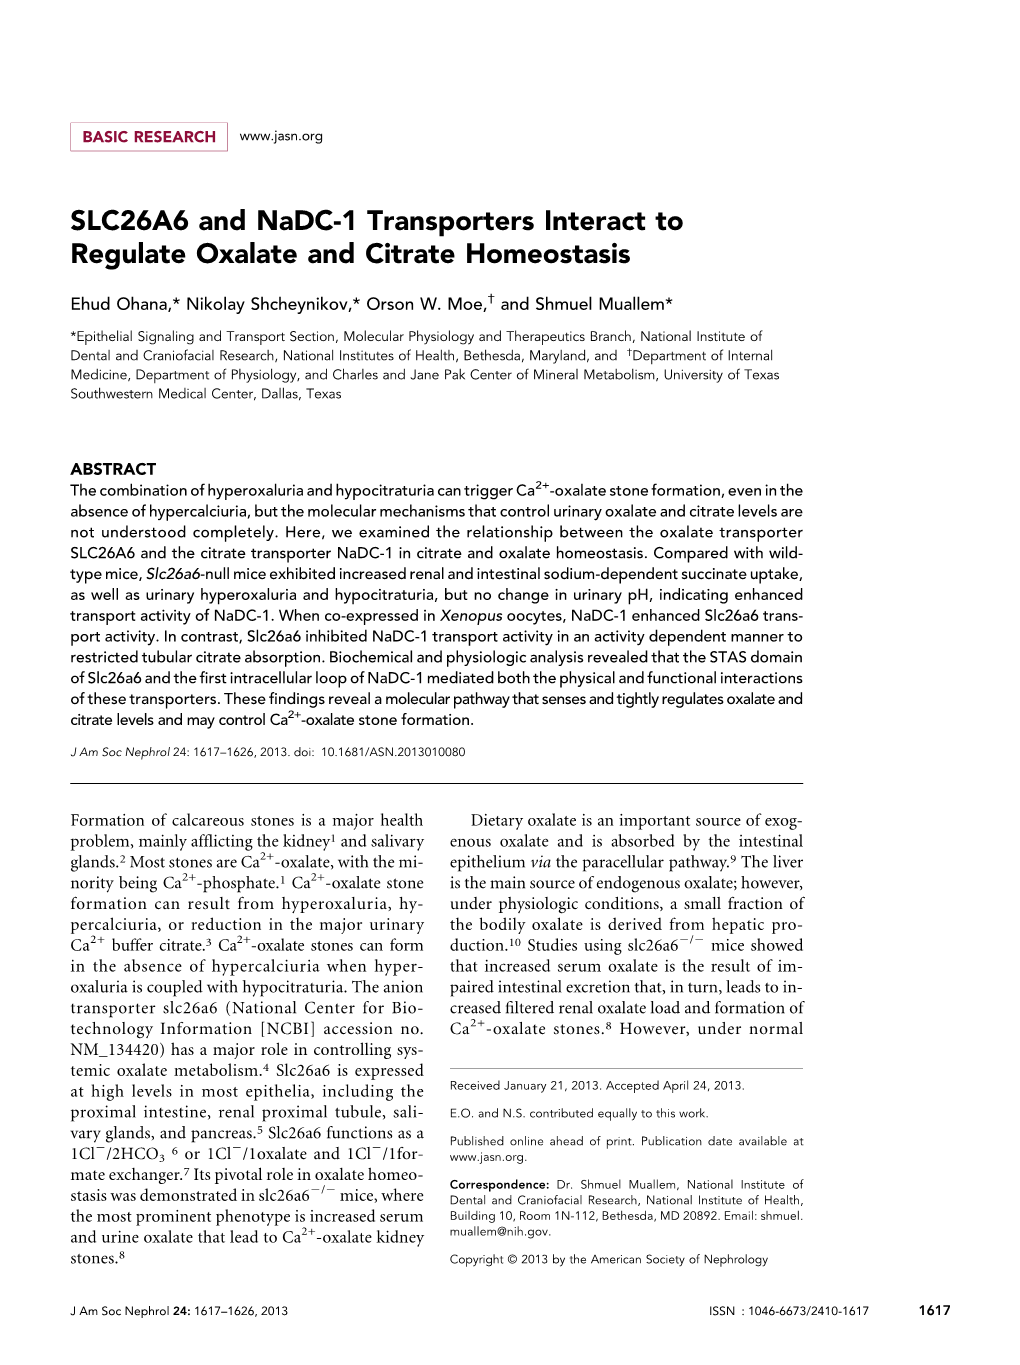 SLC26A6 and Nadc-1 Transporters Interact to Regulate Oxalate and Citrate Homeostasis